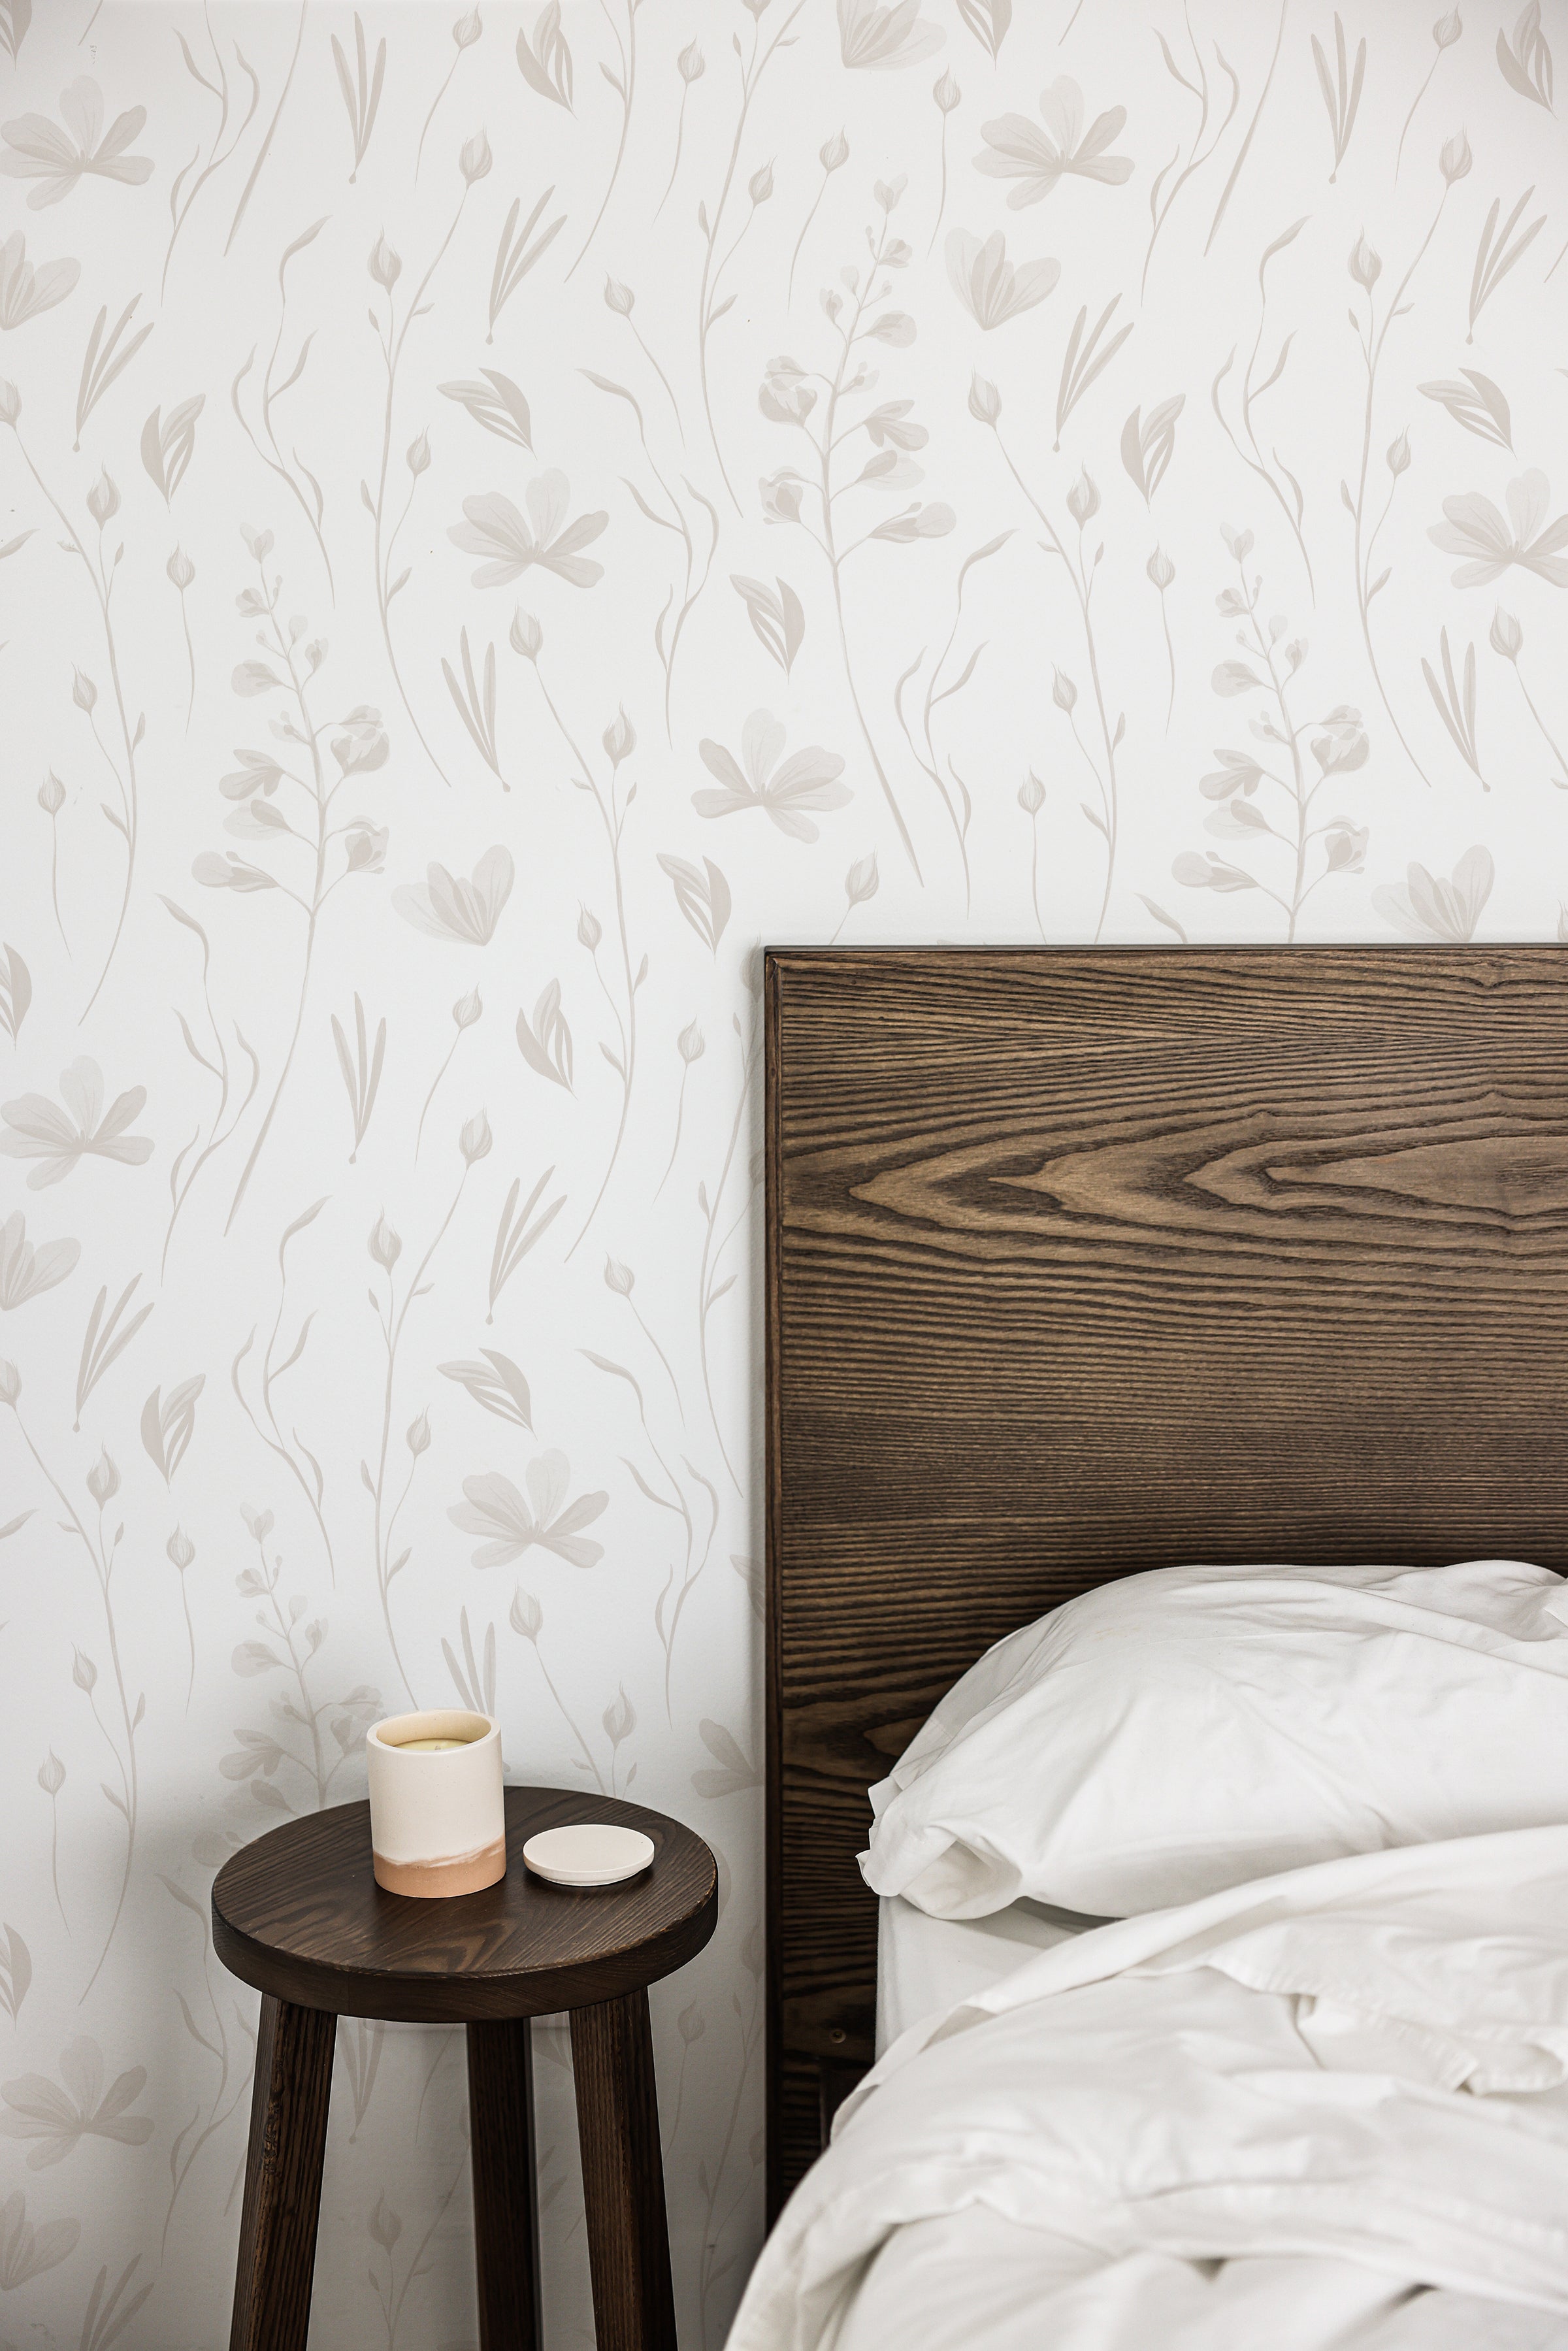 A bedroom scene with the wall featuring warm grey watercolor floral wallpaper, adding a tranquil and elegant atmosphere, alongside a dark wooden bed frame and a small round side table with a ceramic cup.